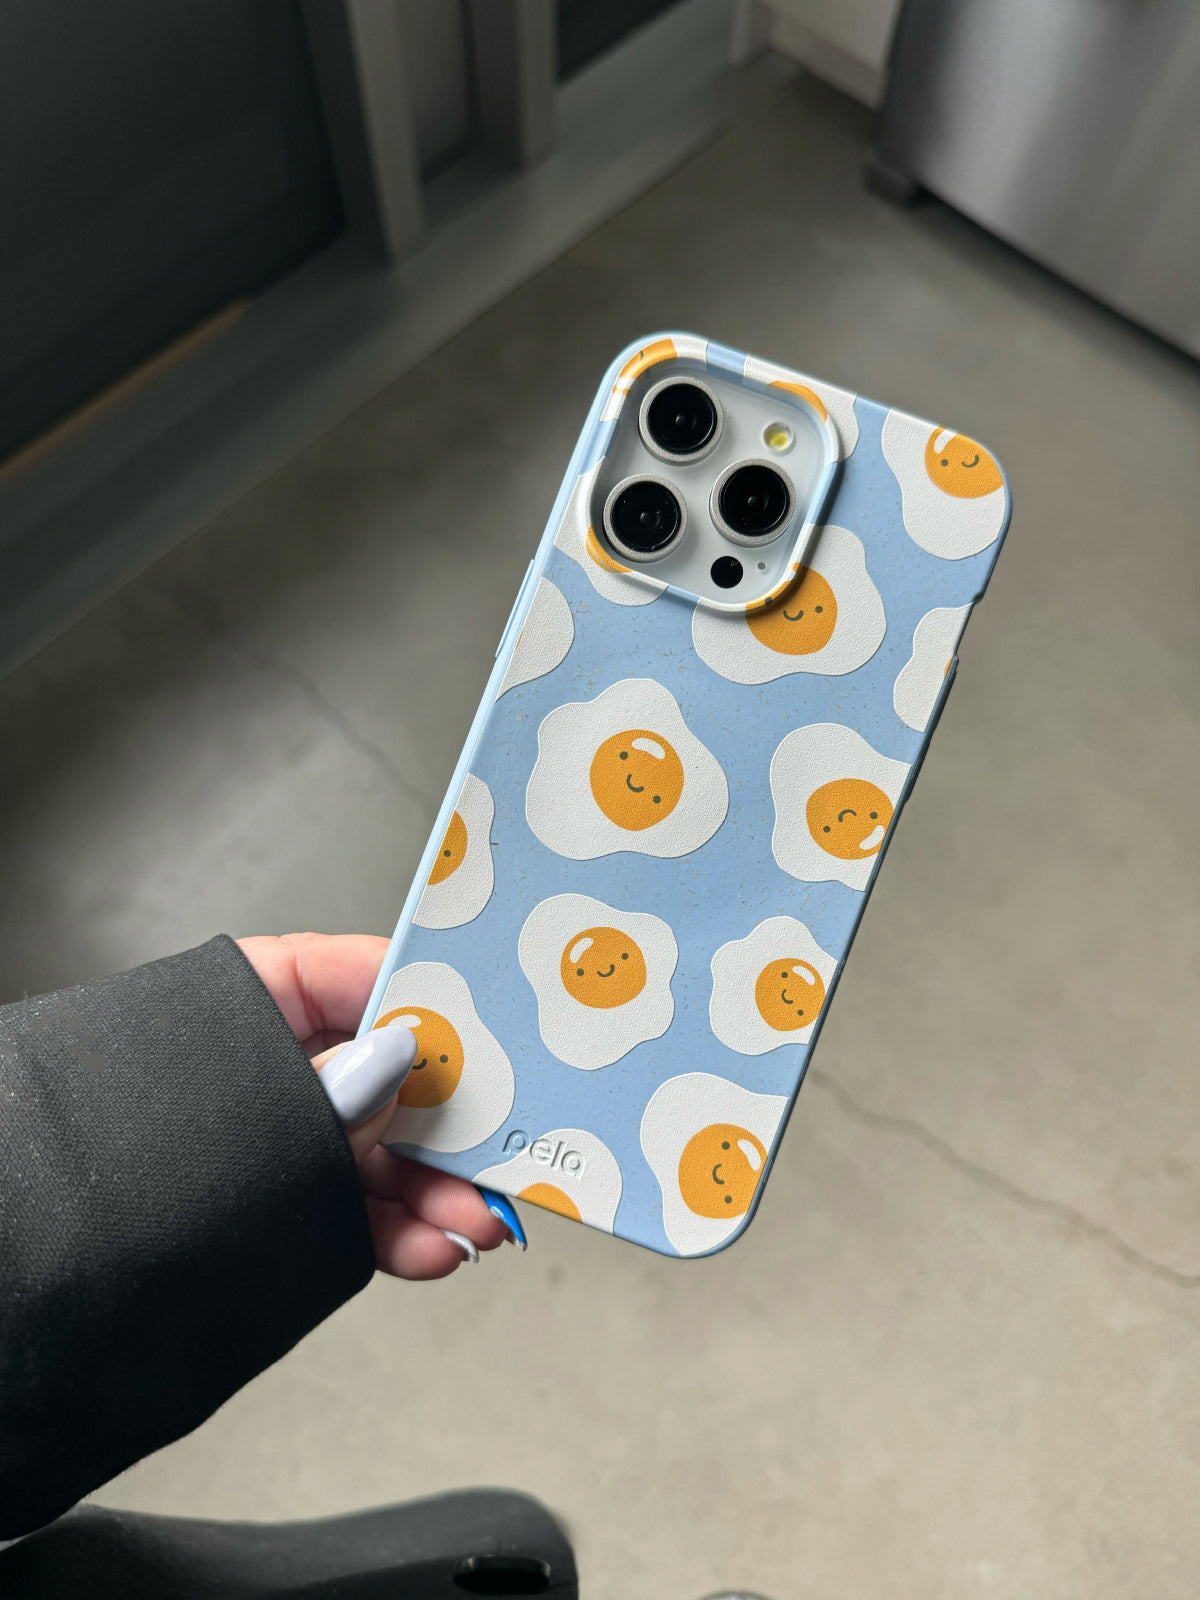 A hand holds Pela's Powder Blue Sunny Side Up Phone Case from their Breakfast Foods Collection. The case features a playful design with smiling fried eggs on a light blue background. The person holding the case has light-colored nails and is wearing a black sleeve.